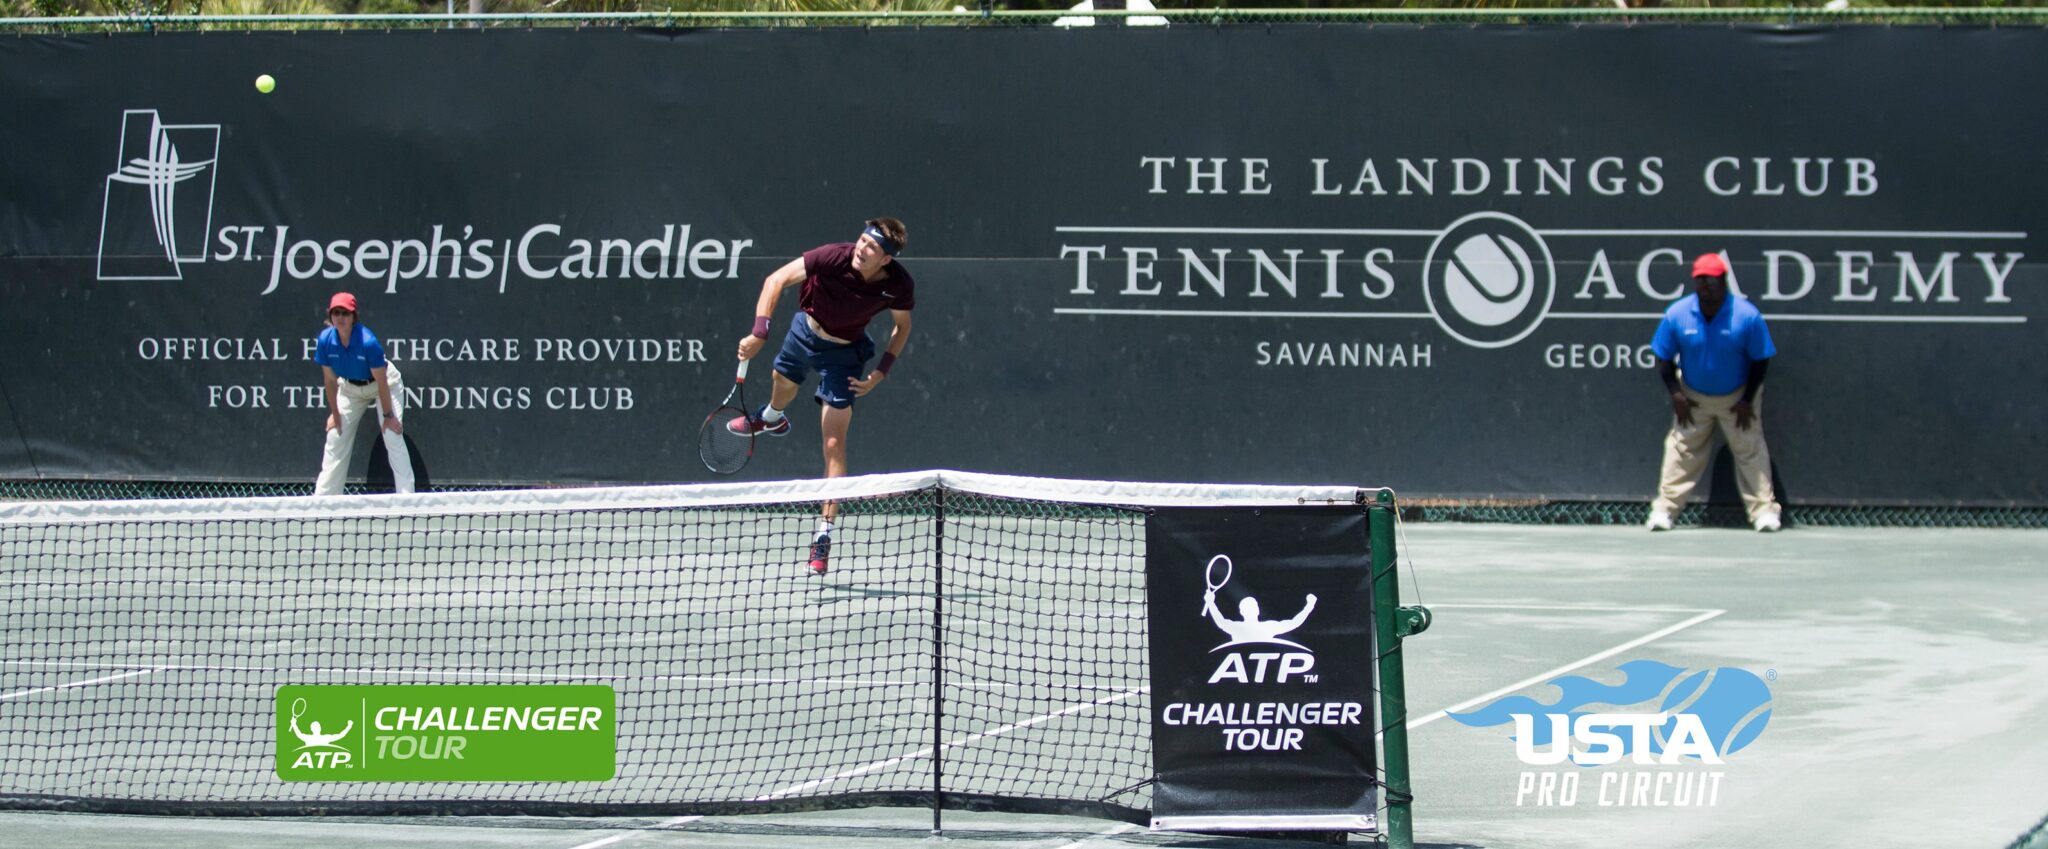 A male tennis player serves up the ball during the Savannah Challenger Tennis Tournament.